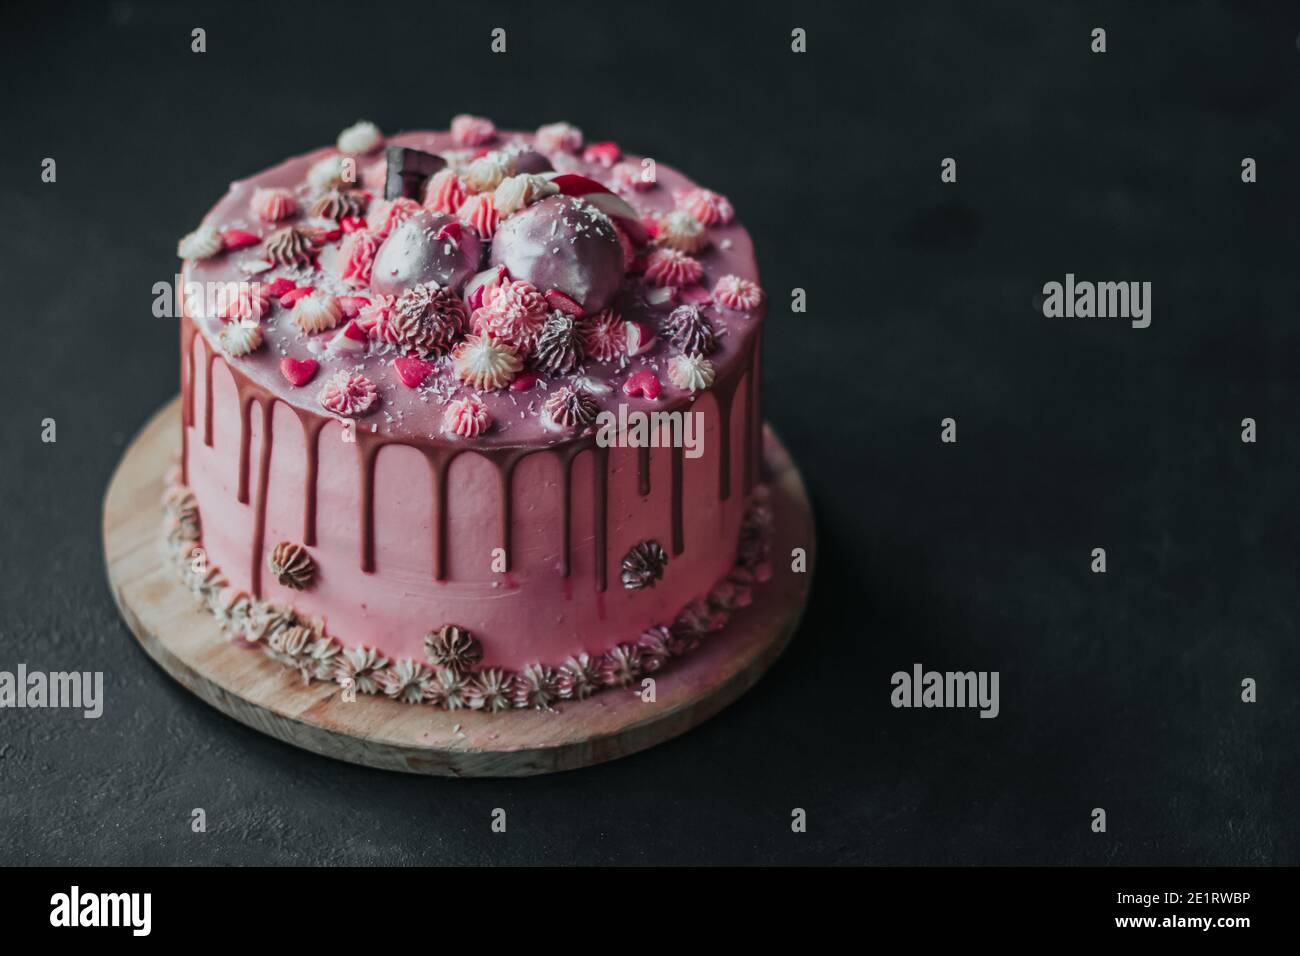 Birthday cake with pink cream and chocolate icing, sprinkled with hearts and sweets. Homemade cake copy space Stock Photo